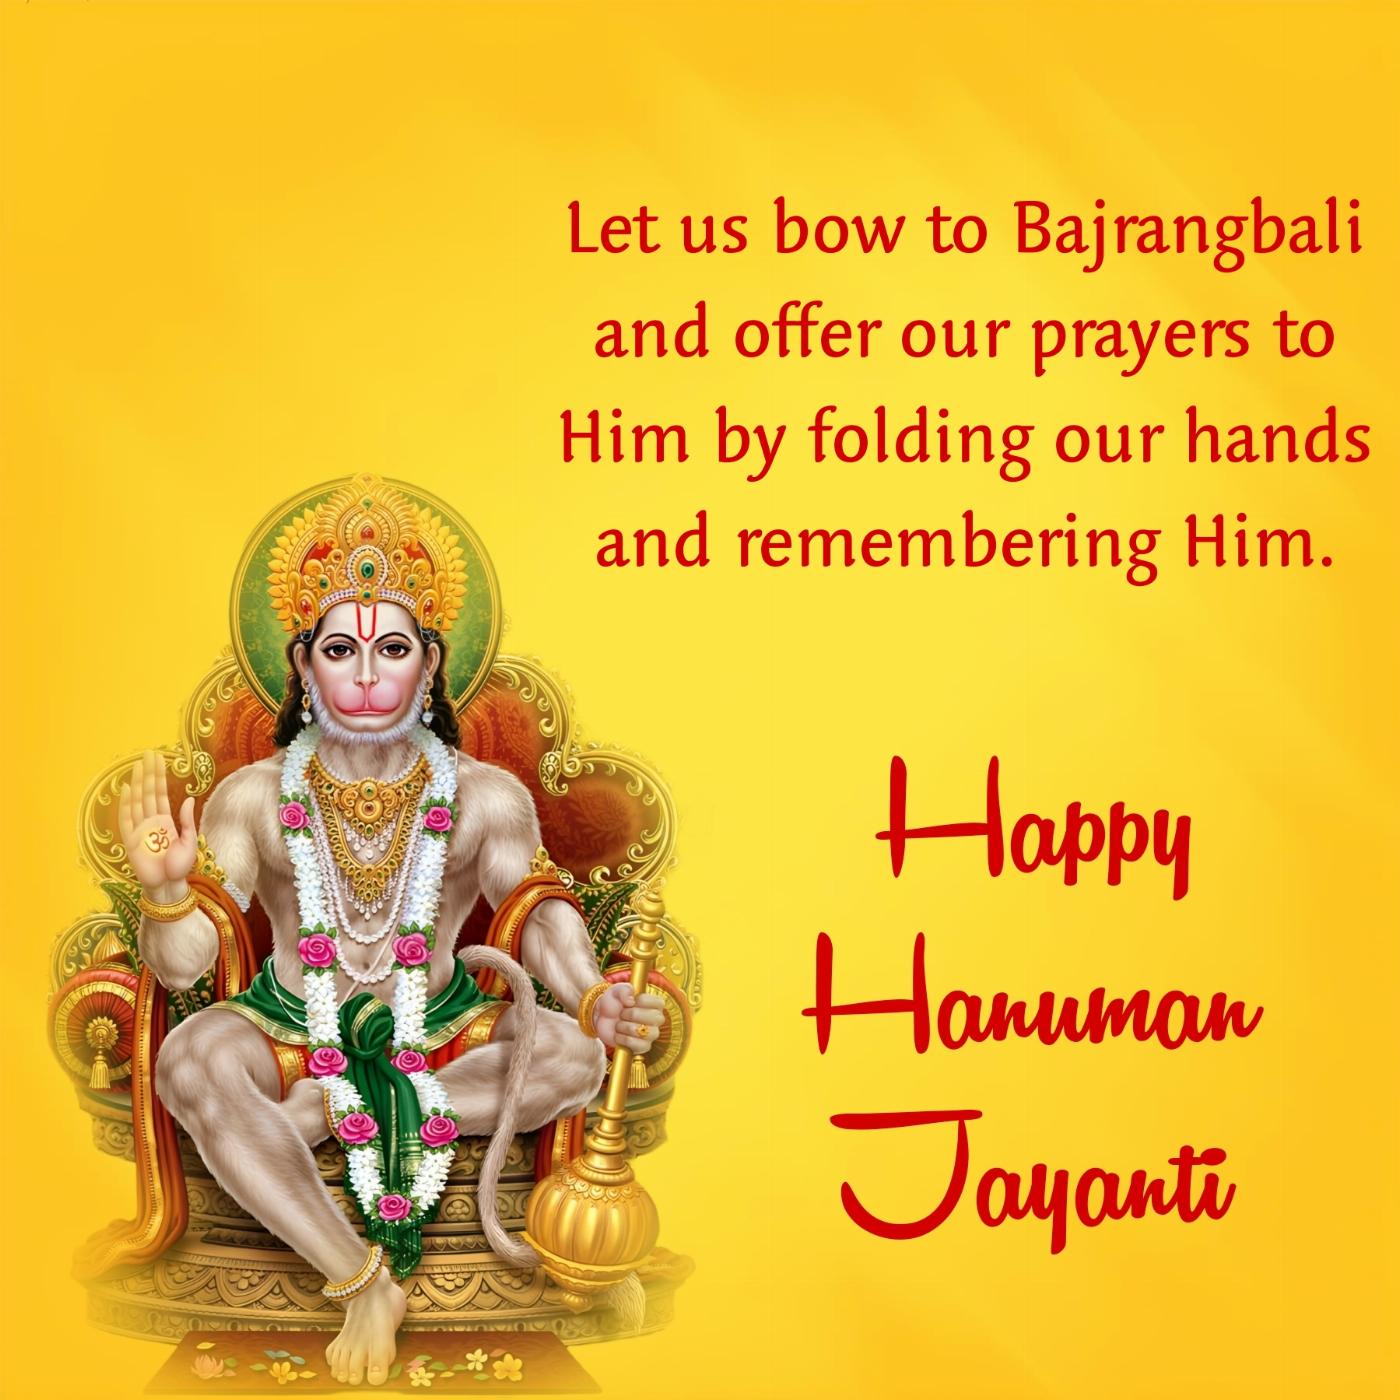 Let us bow to Bajrangbali and offer our prayers to Him